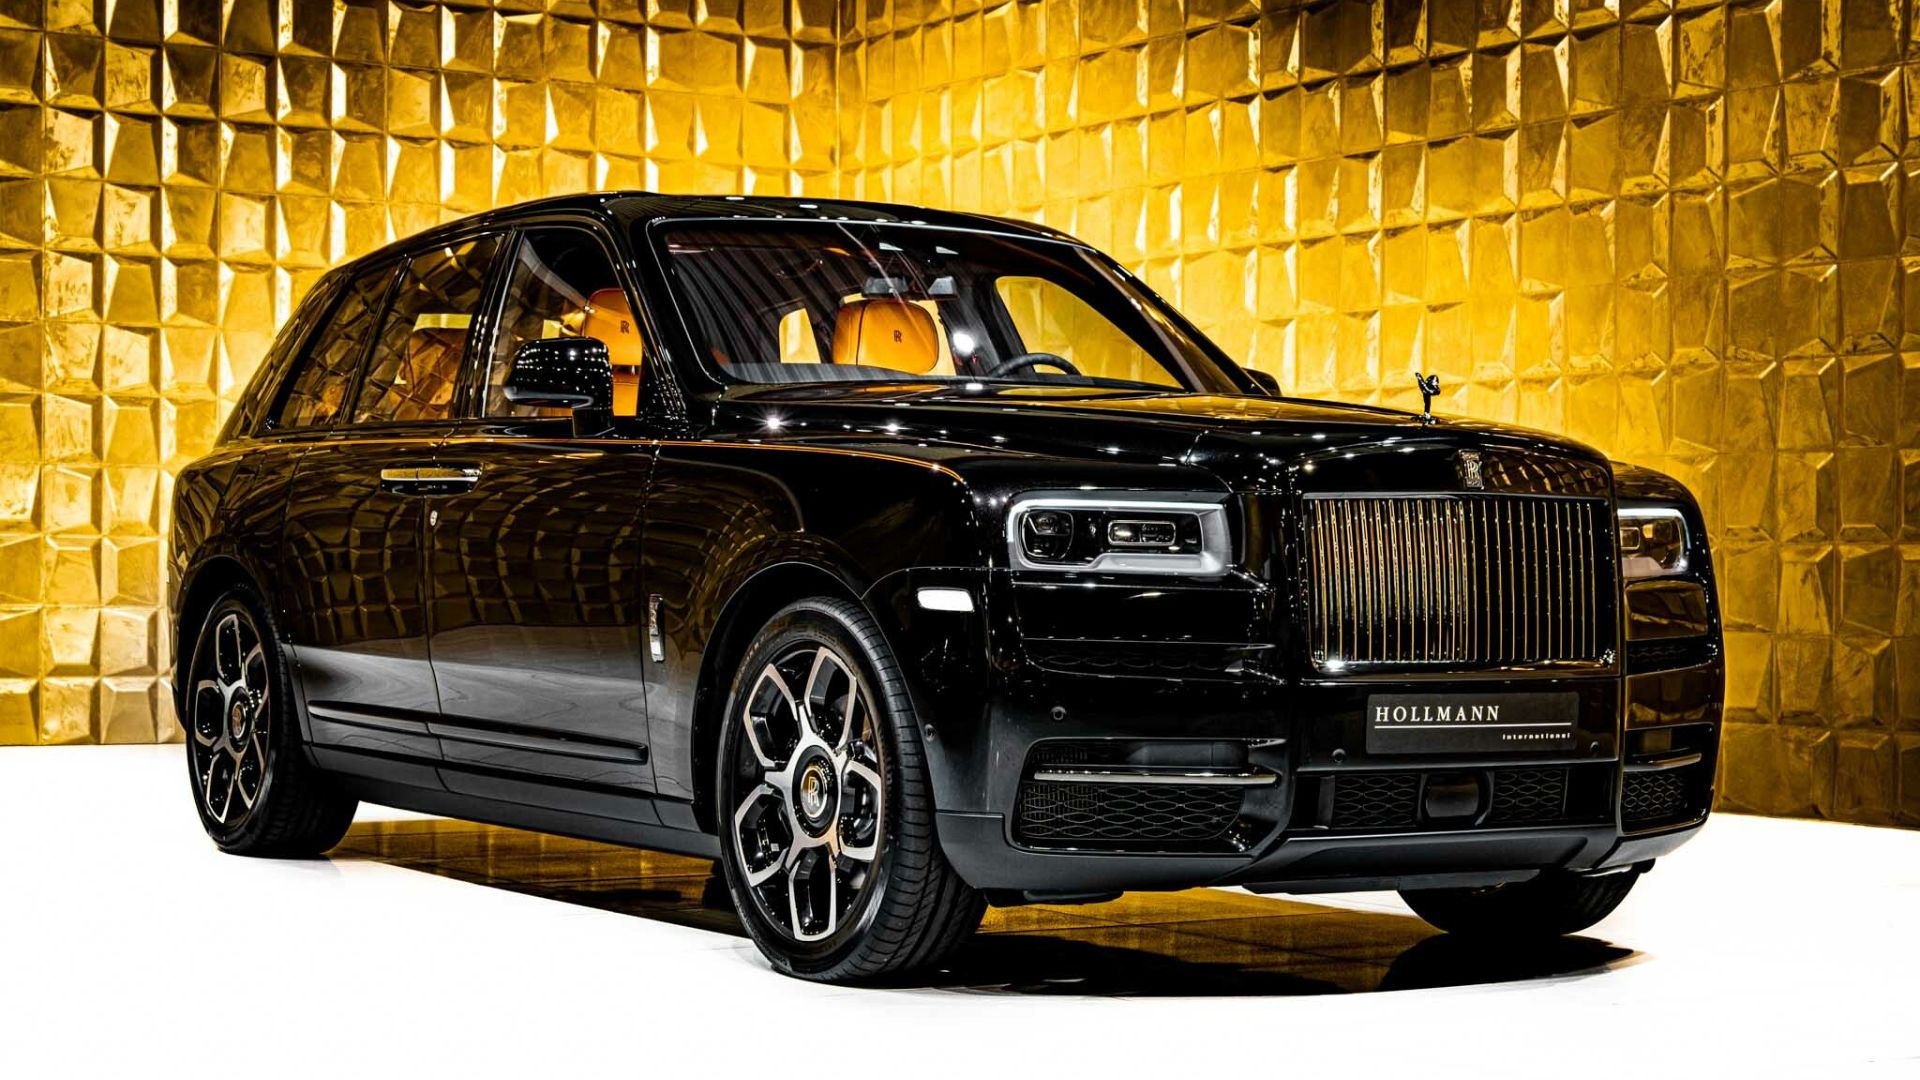 Why Is Thе Rolls Roycе Cullinan A Top Choicе For Dubai's Elitе